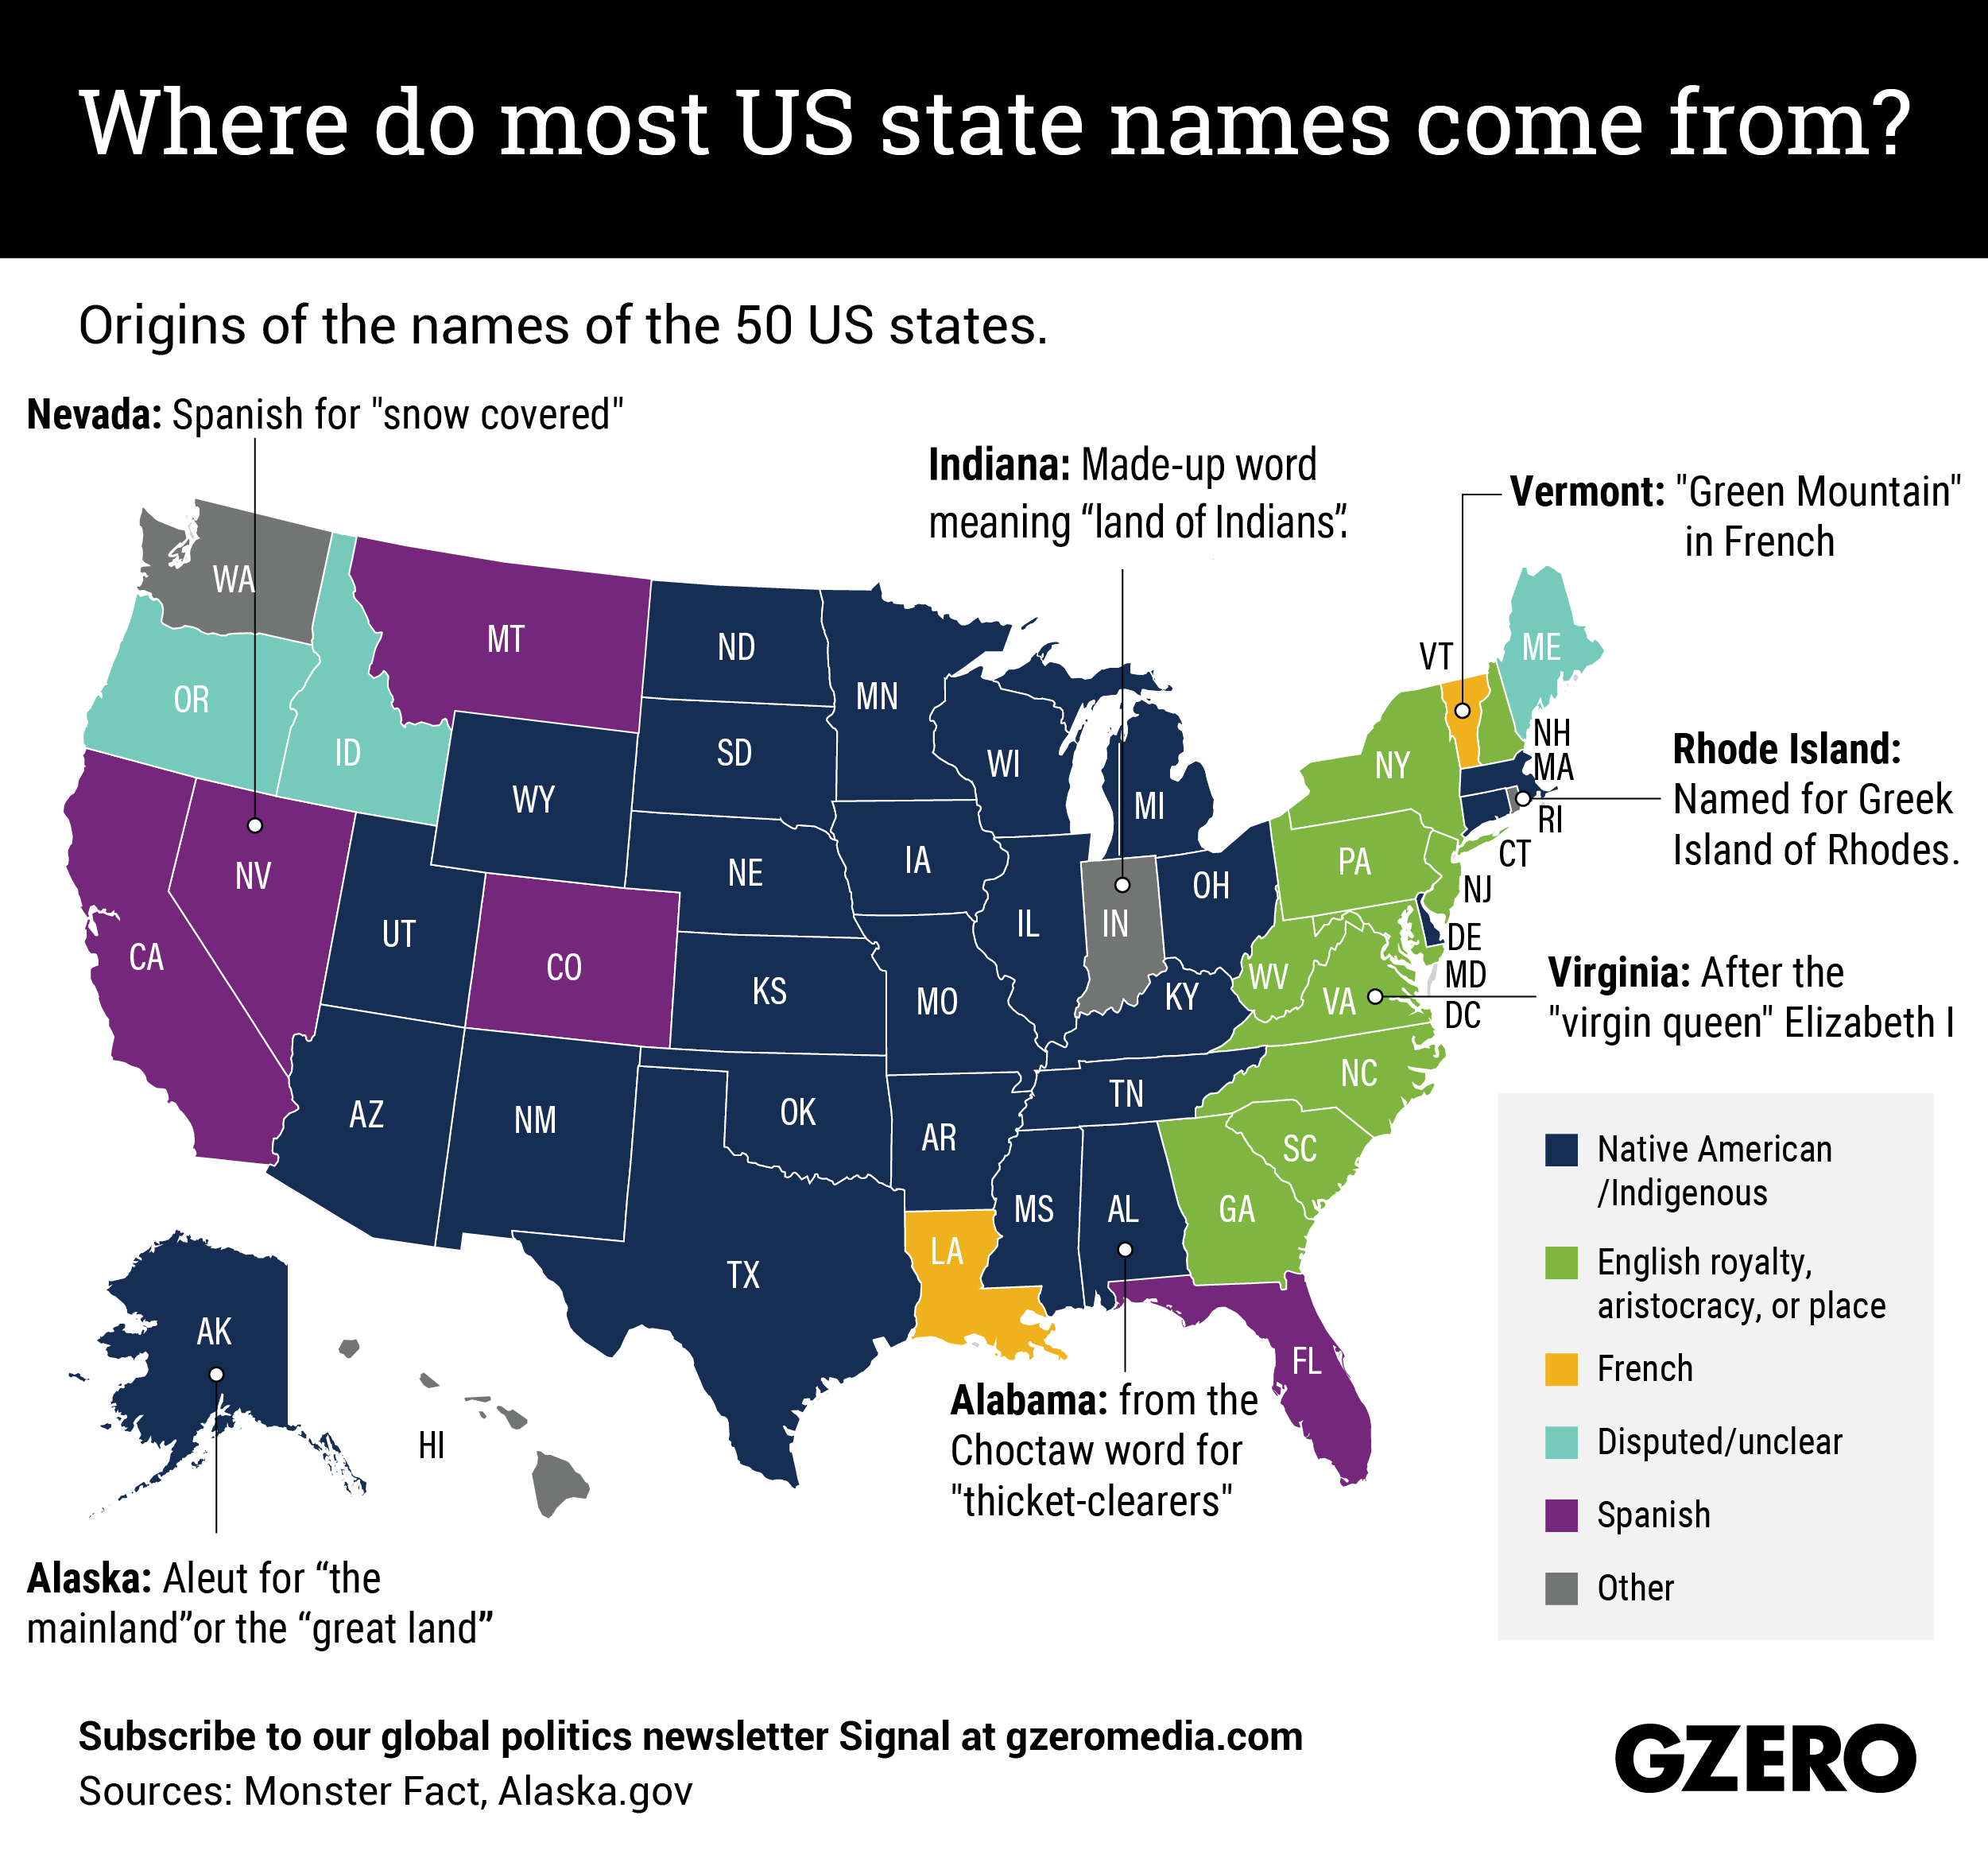 Graphic Truth: Where do most US state names come from?